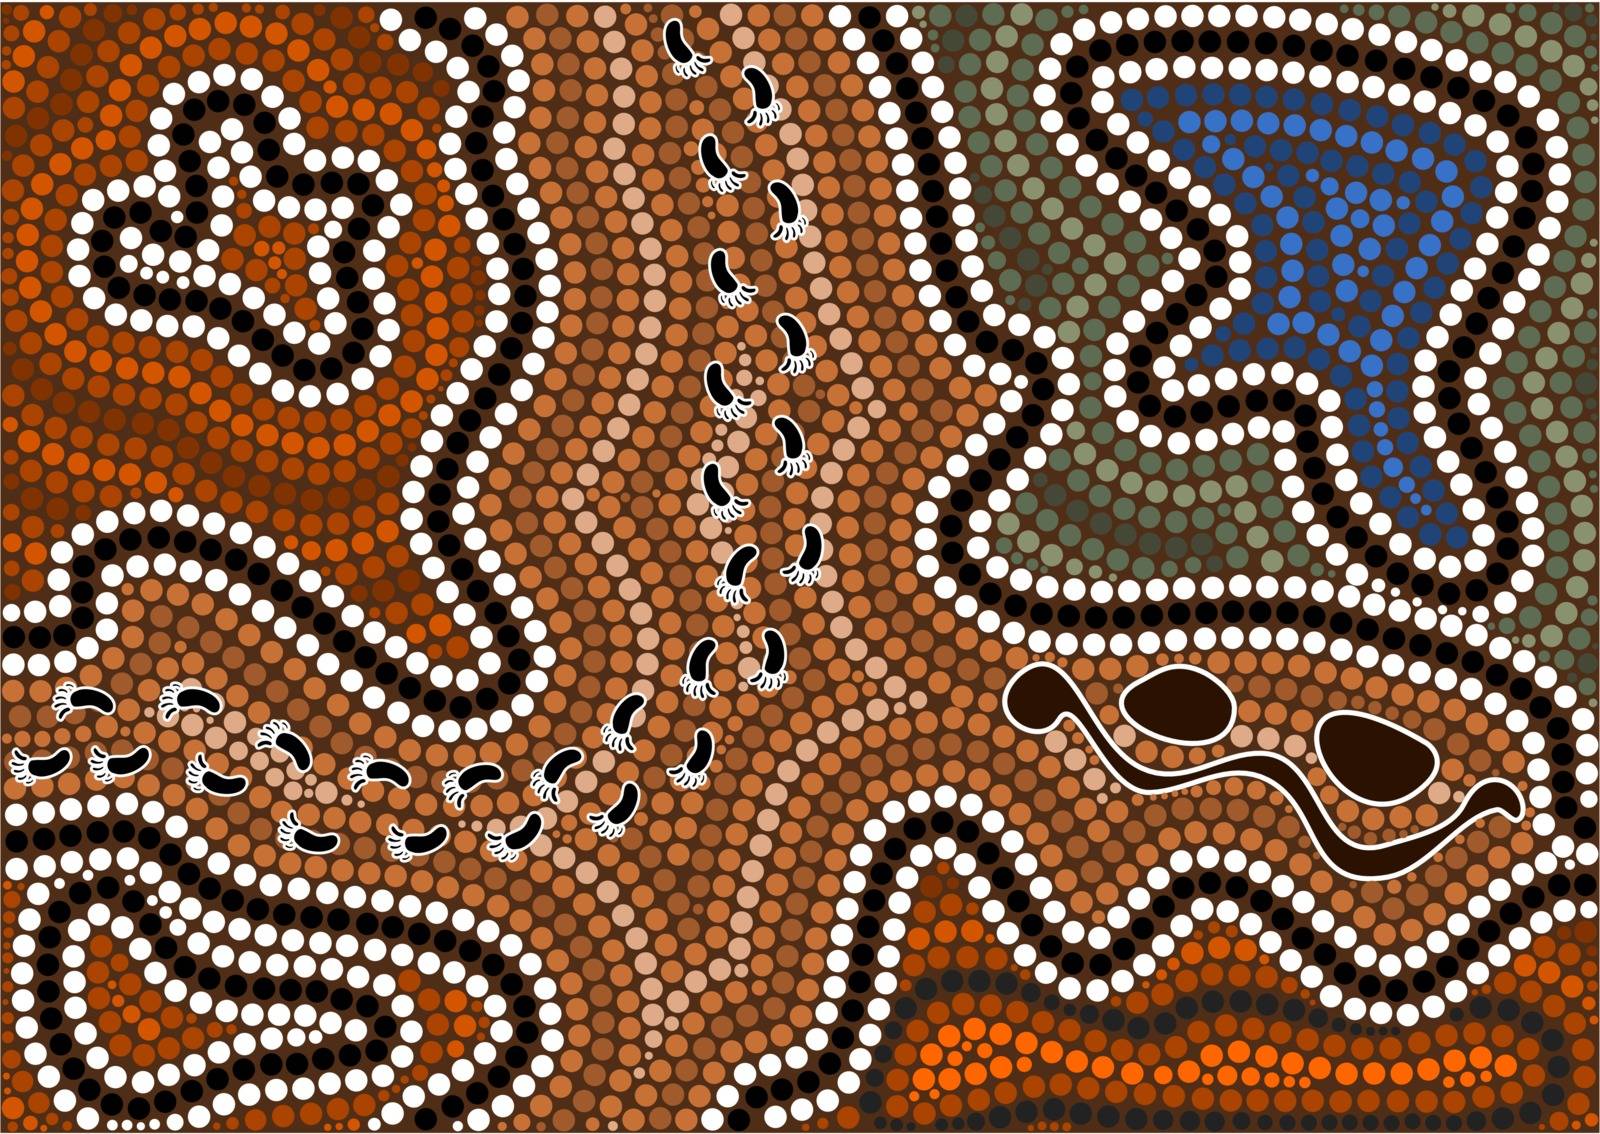 A illustration based on aboriginal style of dot painting depicting the way i've gone